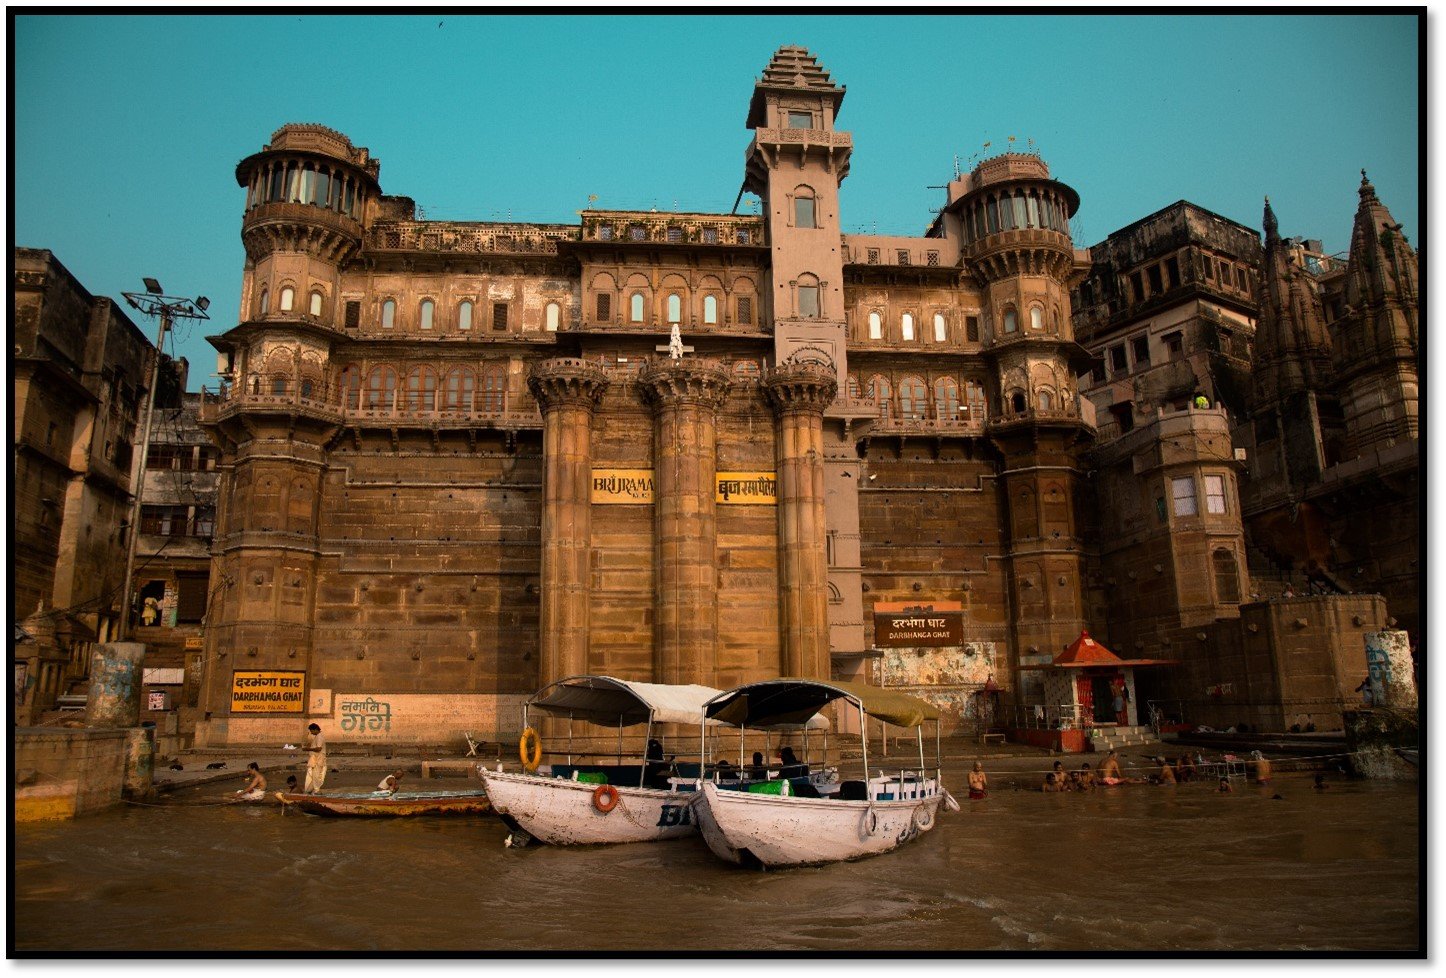 varanasi has an enduring old-world allure that appeals to all. Every street has a unique history. Darbhanga Ghat